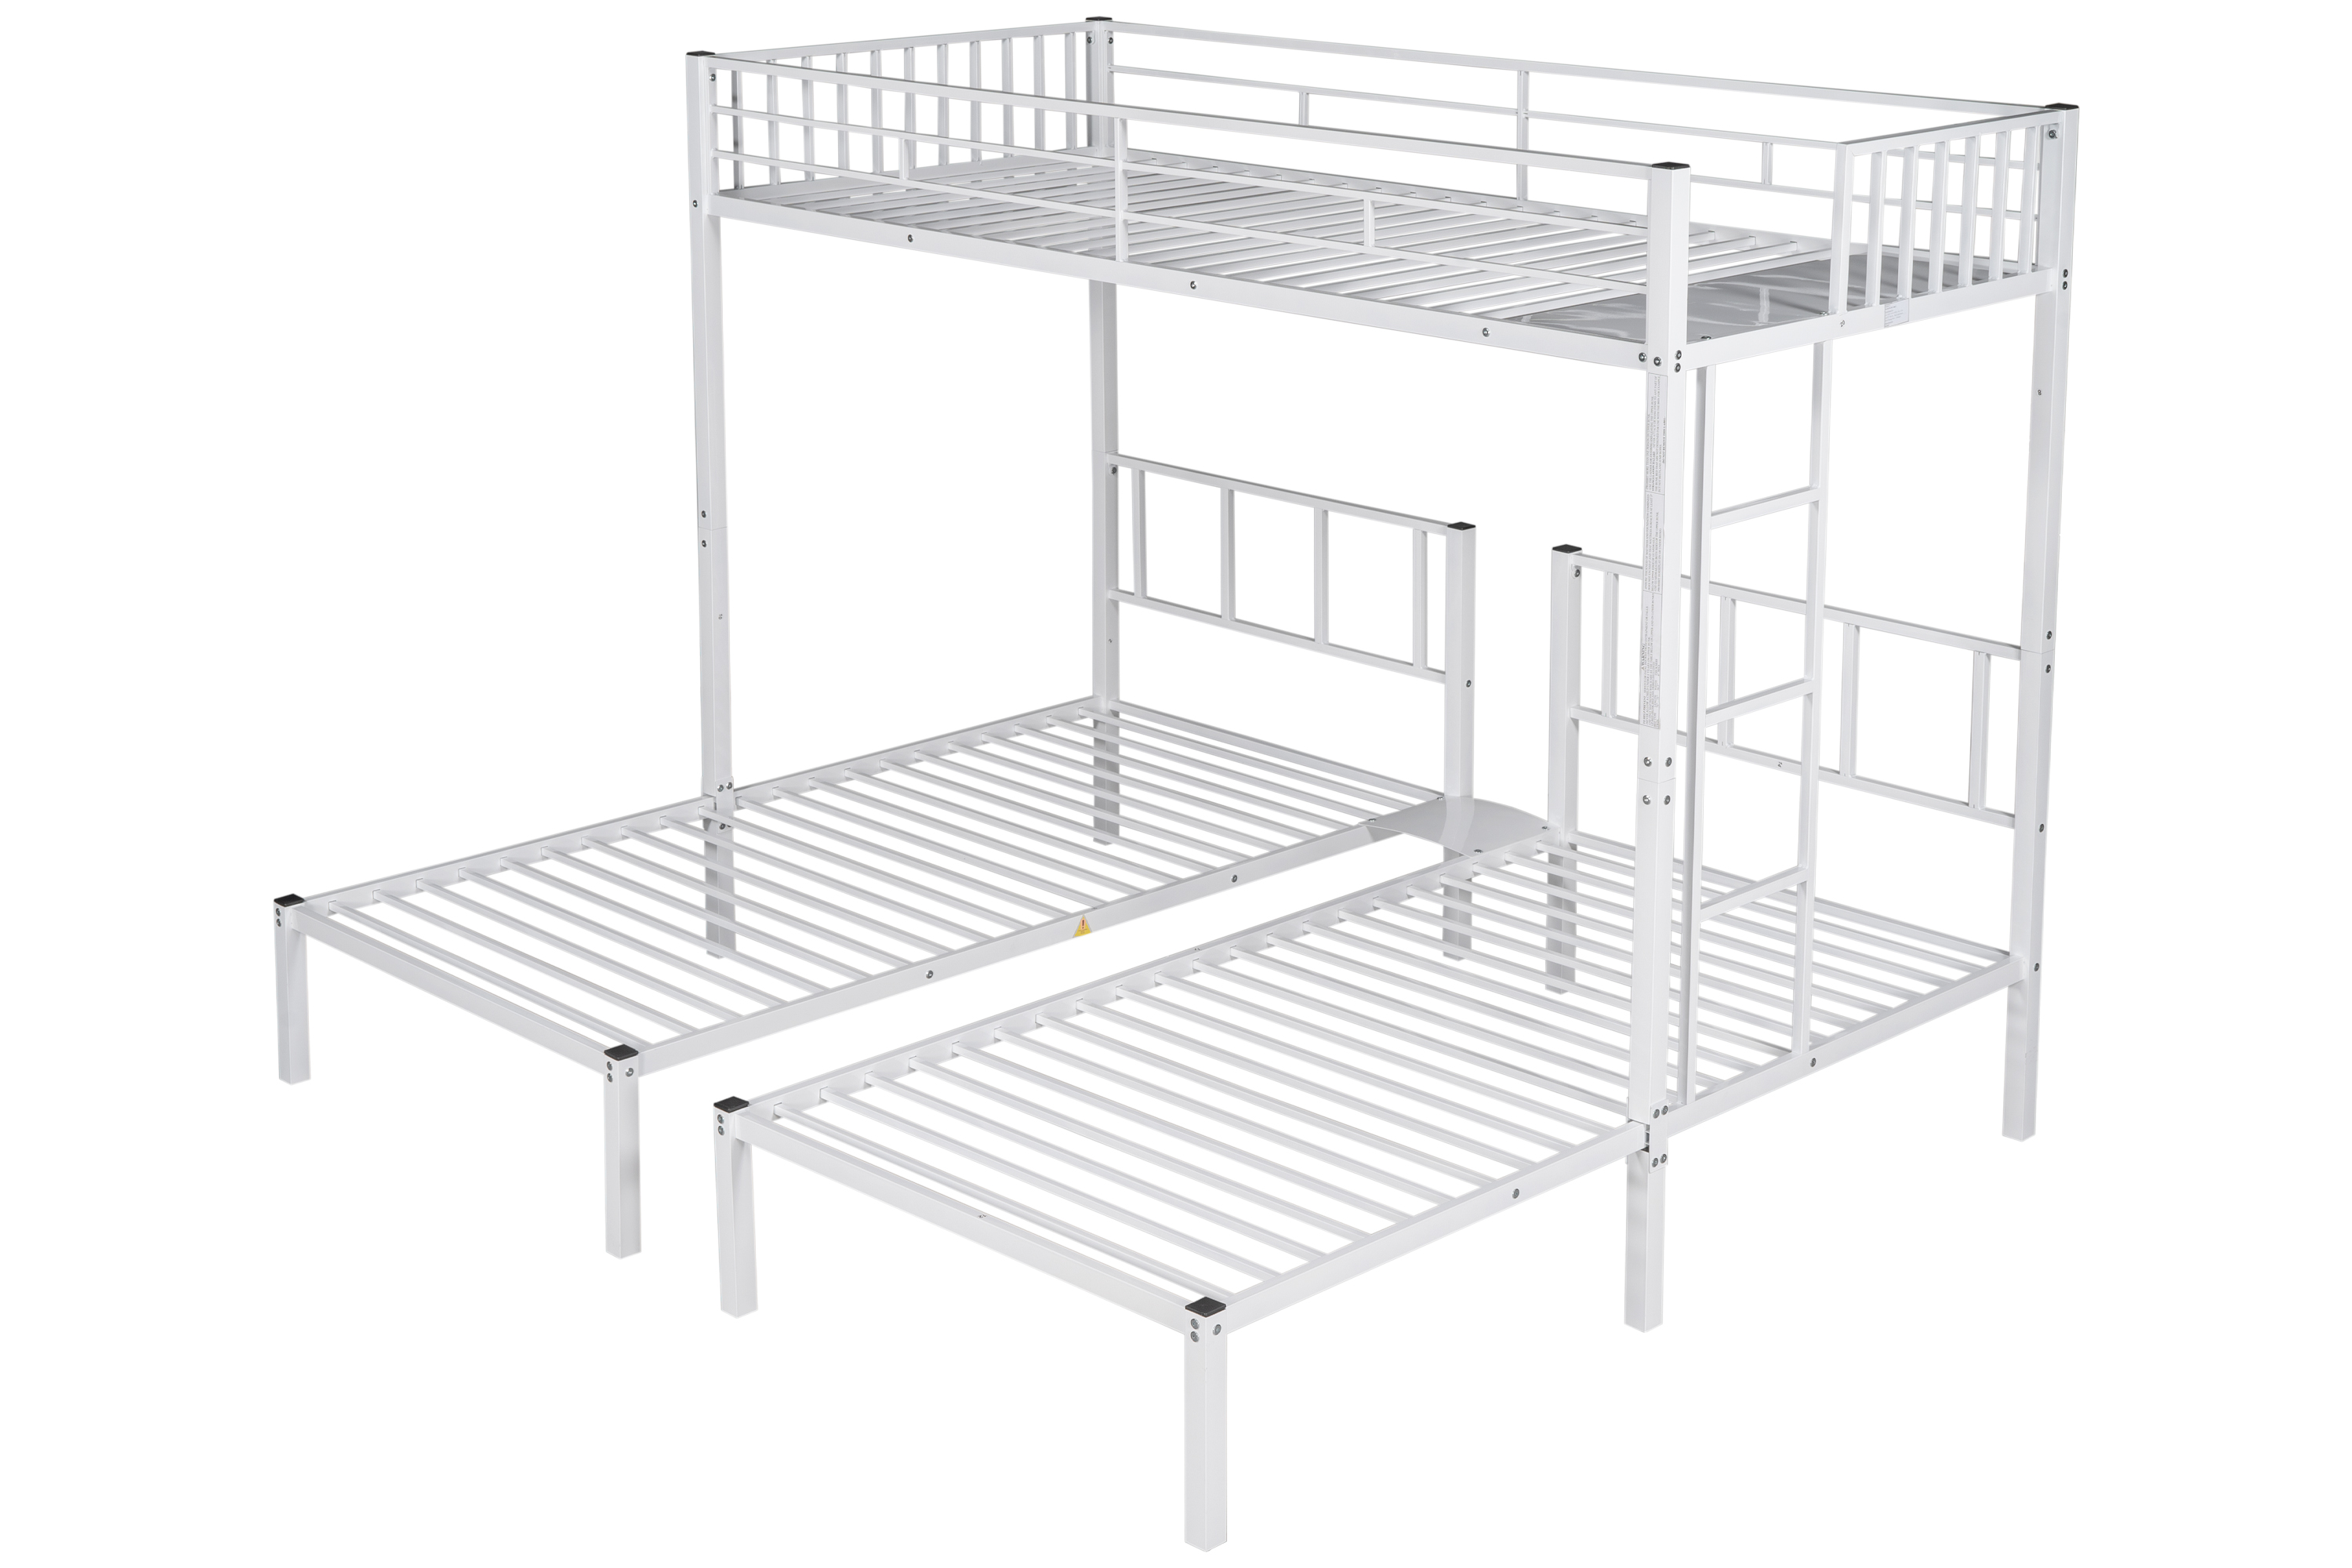 White Triple Twin Bunk Bed, Can Be Separated Into 3 Twin Beds, Suitable for Bedroom Living Room Dorm, 91.73"L x 77.95"W x 72.05"H, for Kids Adults Teens【2022 New】 - image 4 of 9